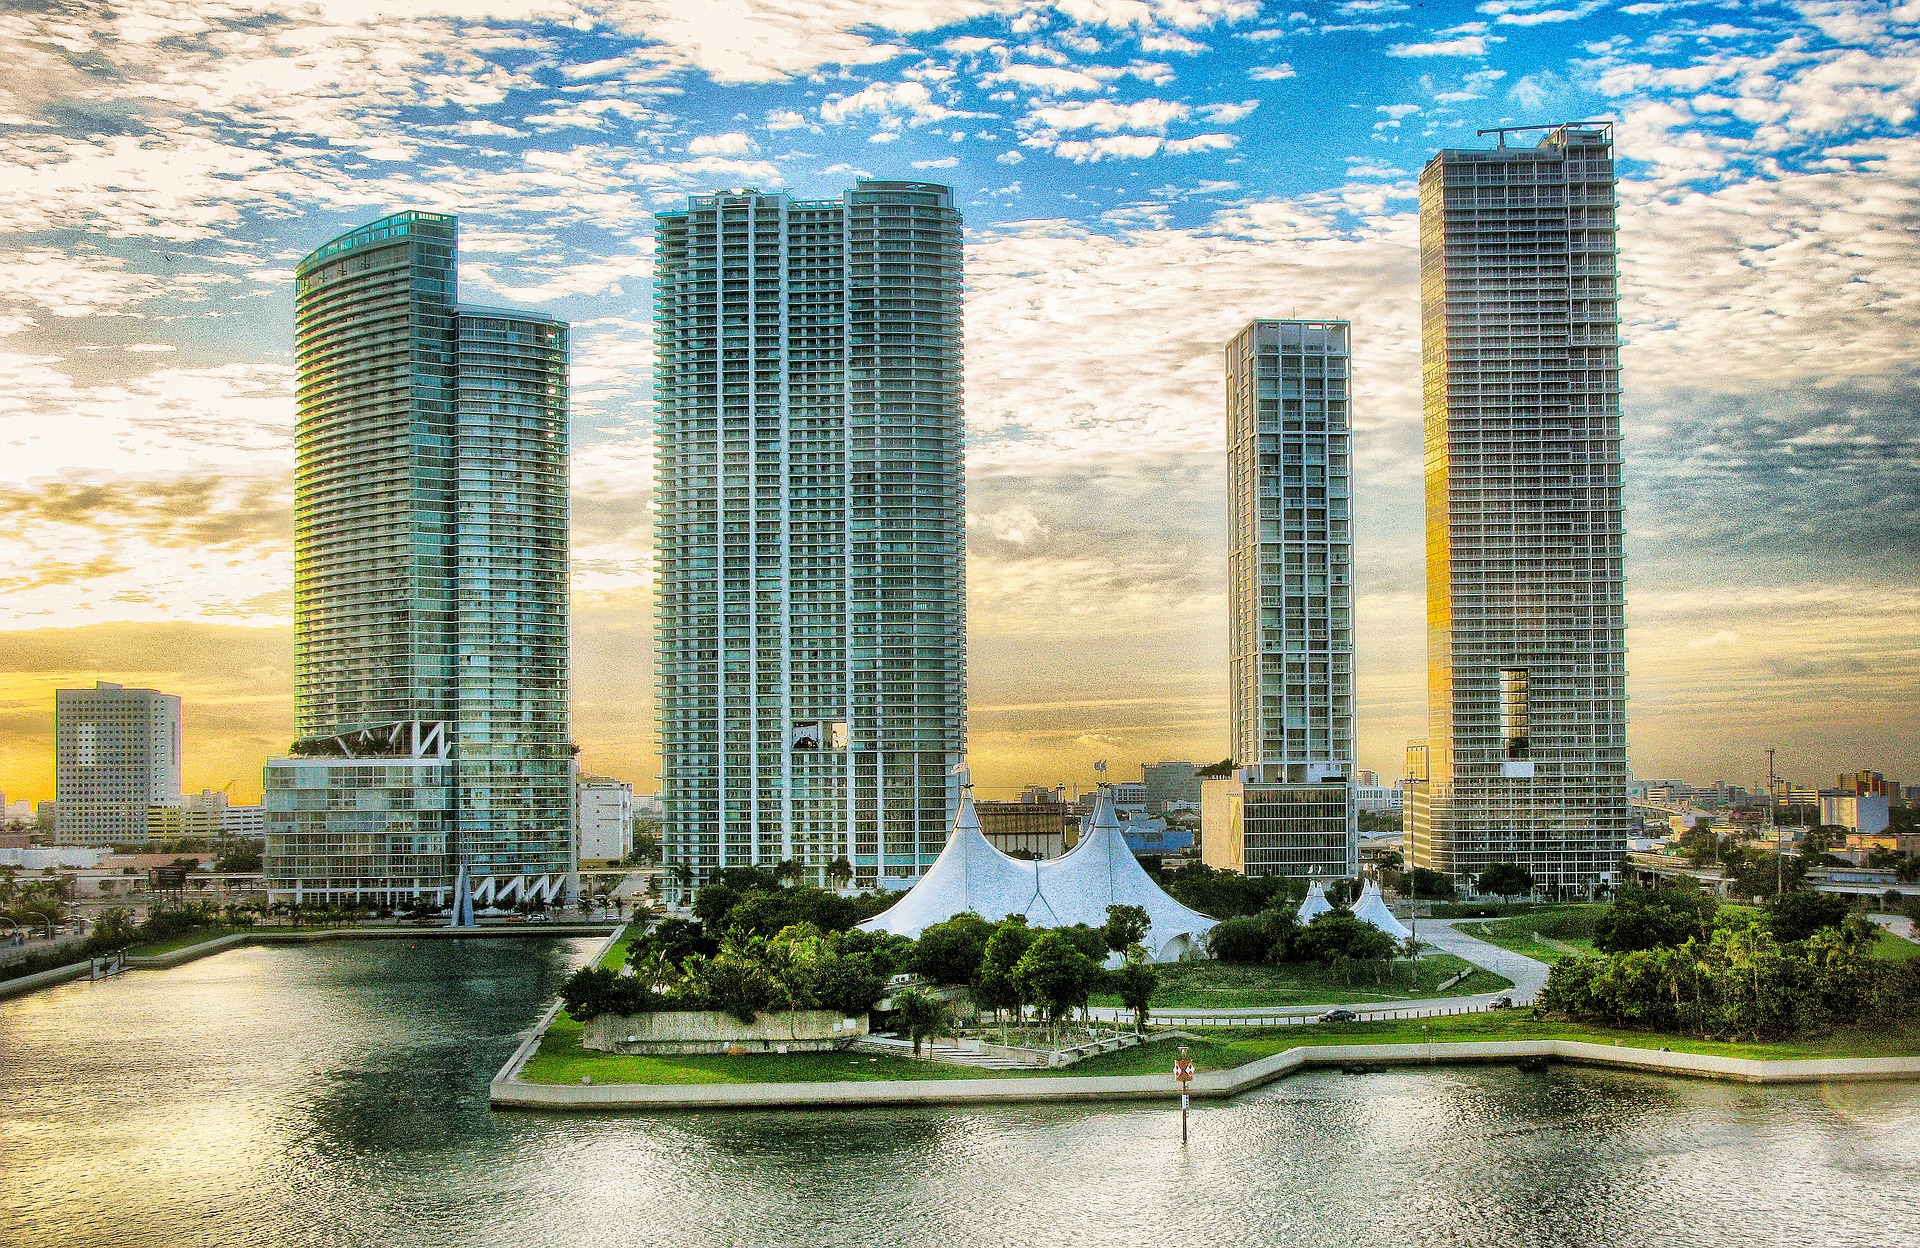 sustainable-architecture:-luxury-residences-powered-by-the-sun-arrive-in-miami